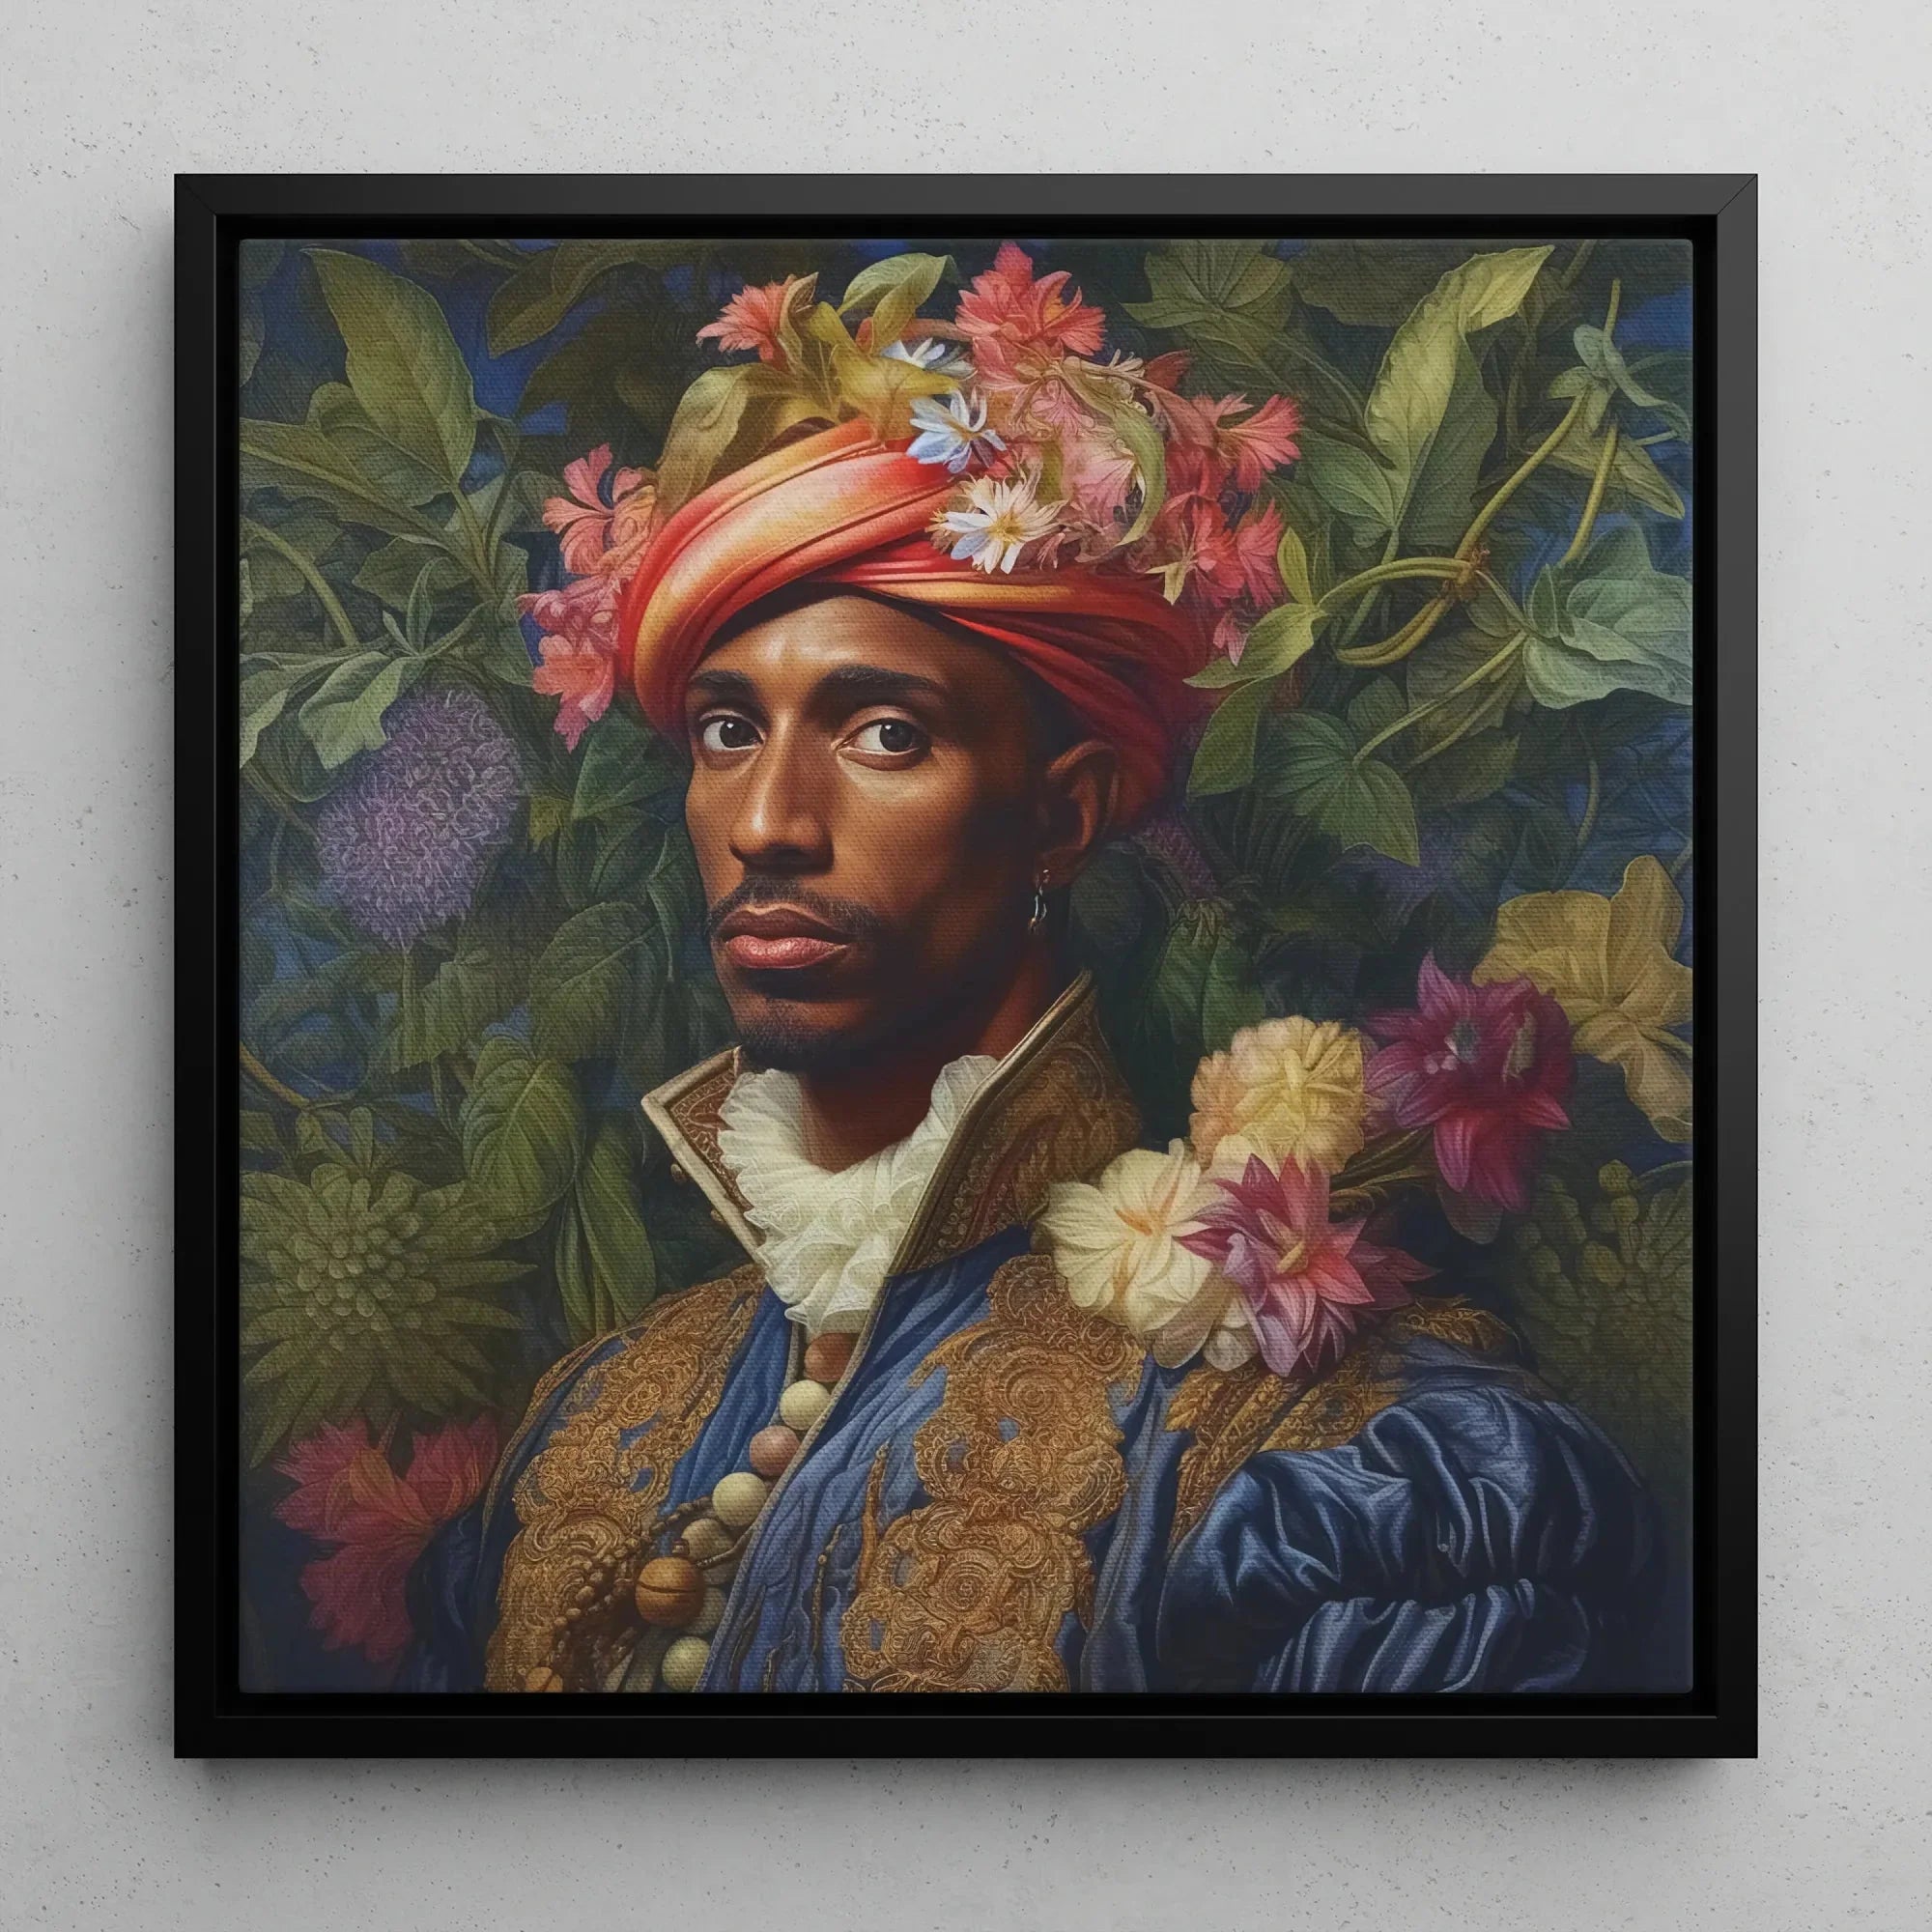 Prince Isaiah - Afroamerican Gay Black Royalty Framed Canvas - 16’x16’ / Black Frame / White Wrap - Posters Prints